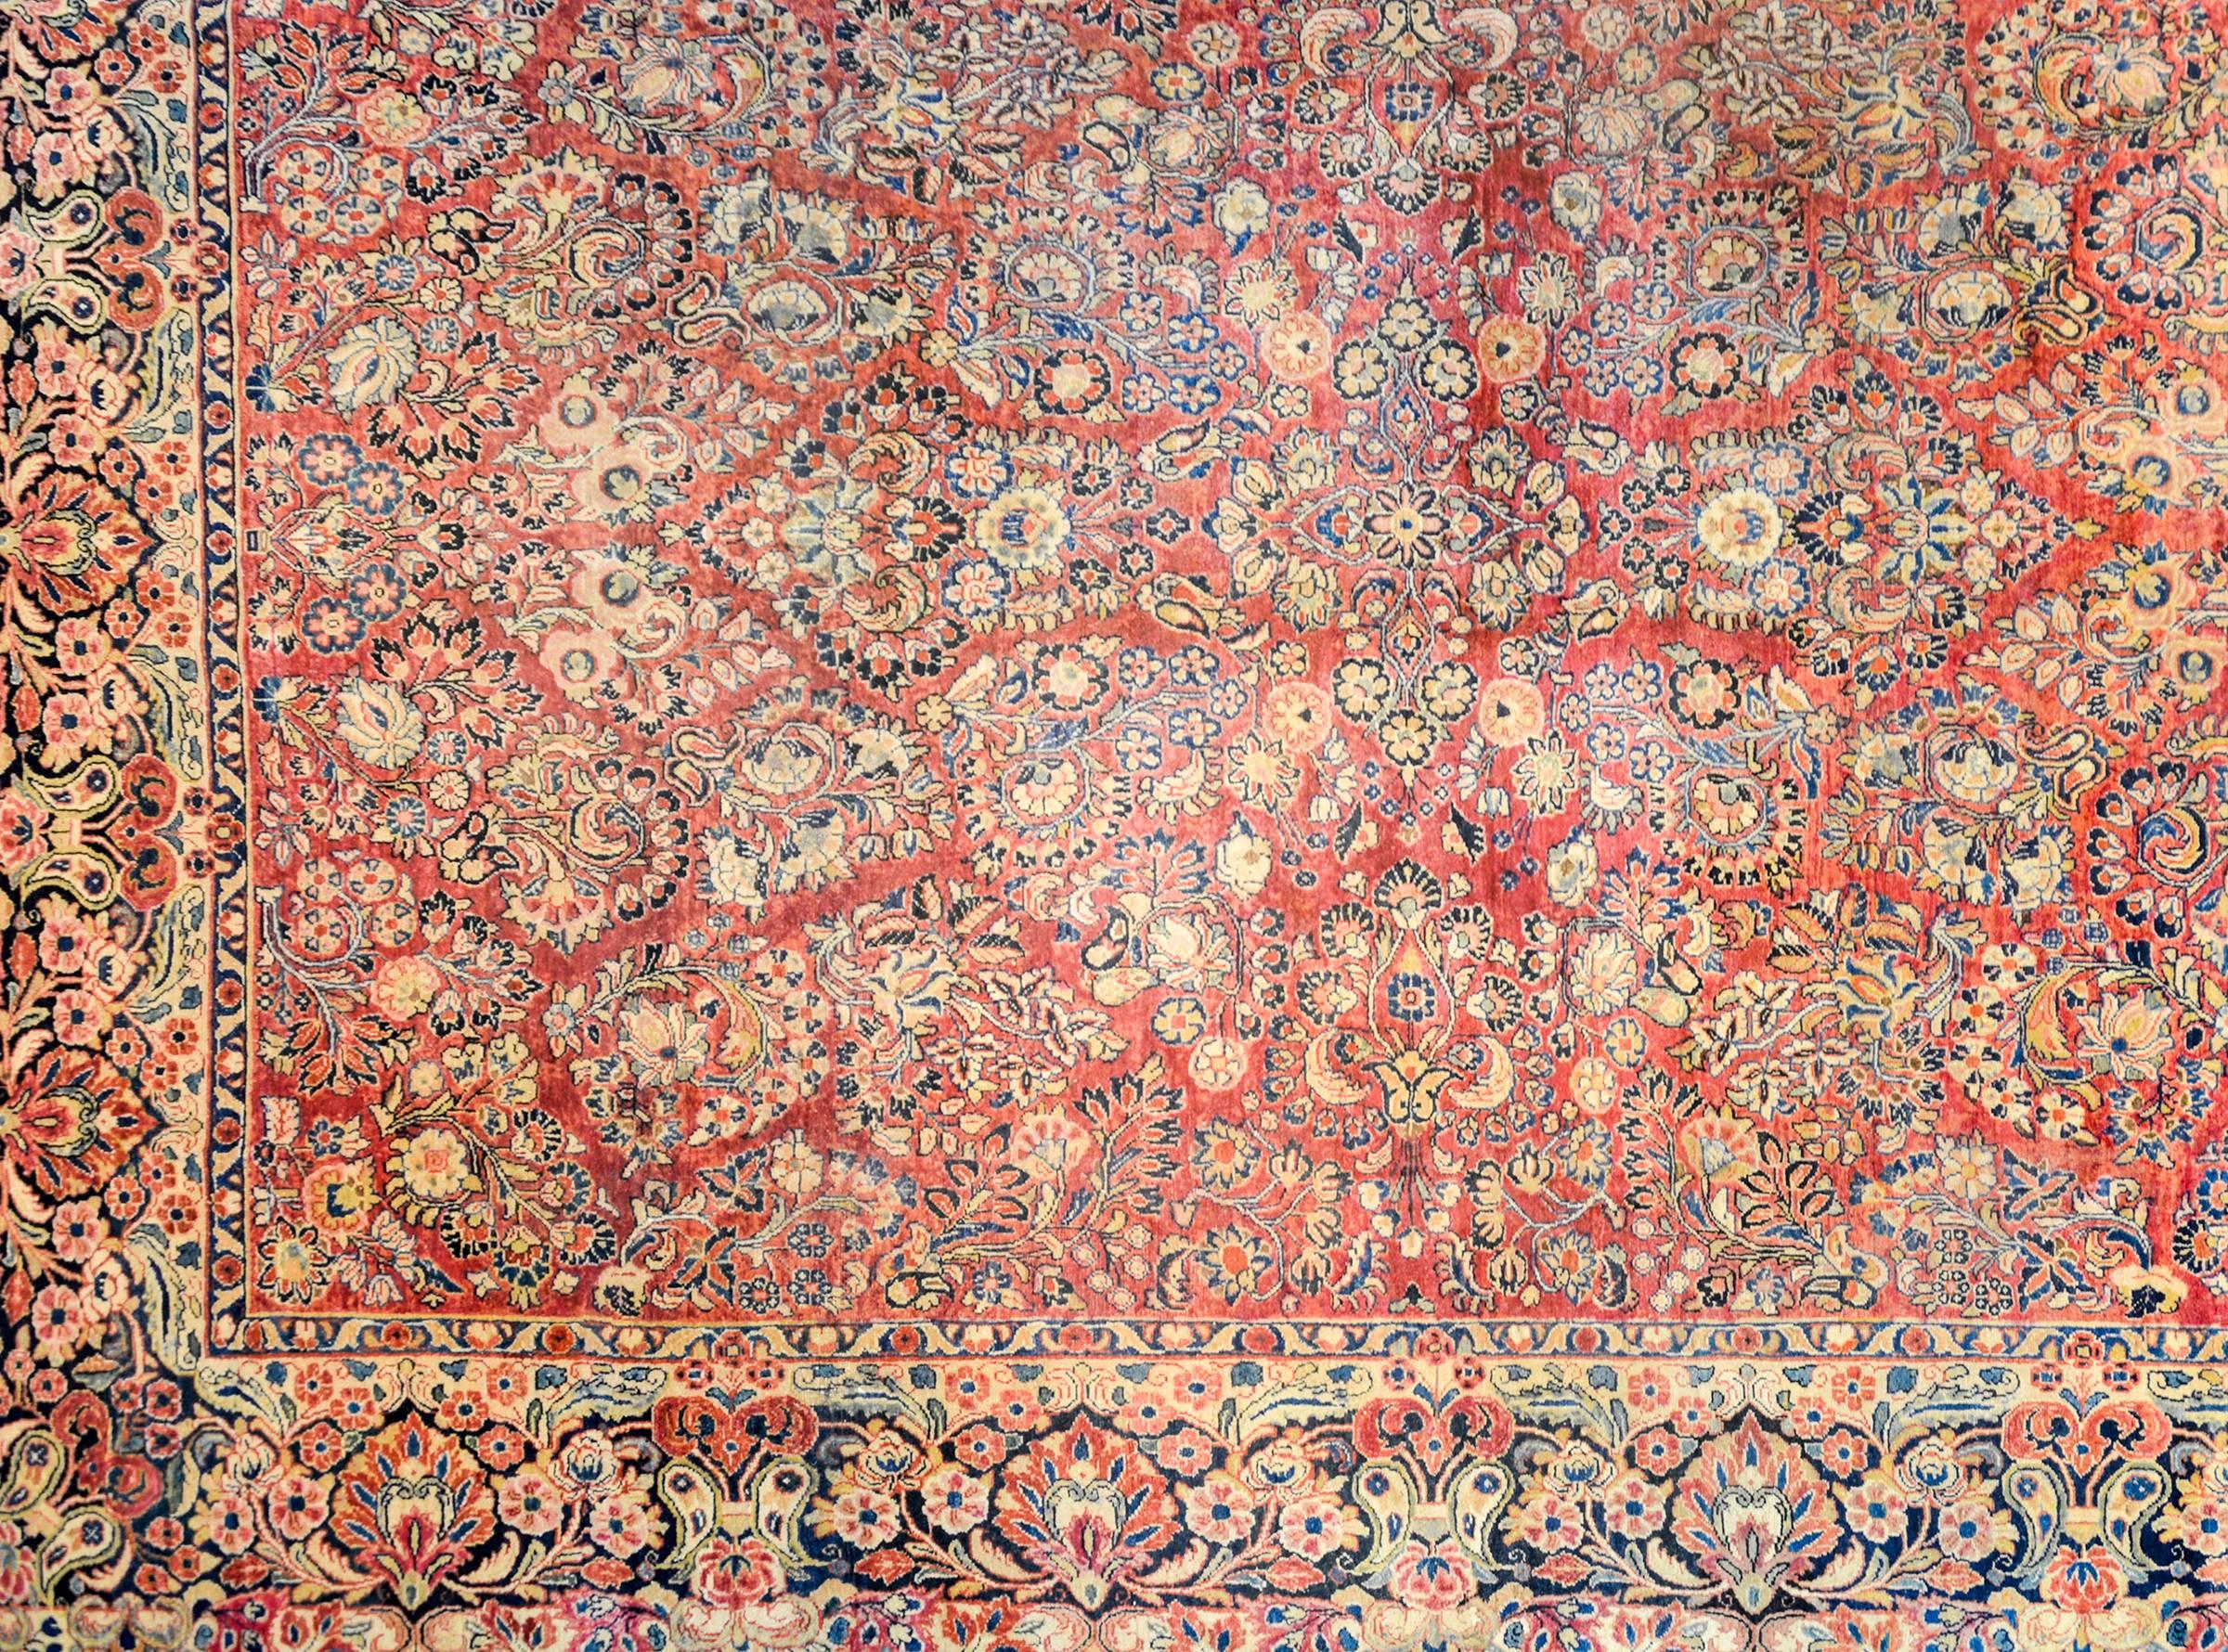 An exceptional early 20th century Persian Sarouk rug with a beautiful mirrored floral and vine pattern woven in light and dark indigo, pink, brown, green and gold, on a rich cranberry background. The border is wonderfully rendered with a large-scale